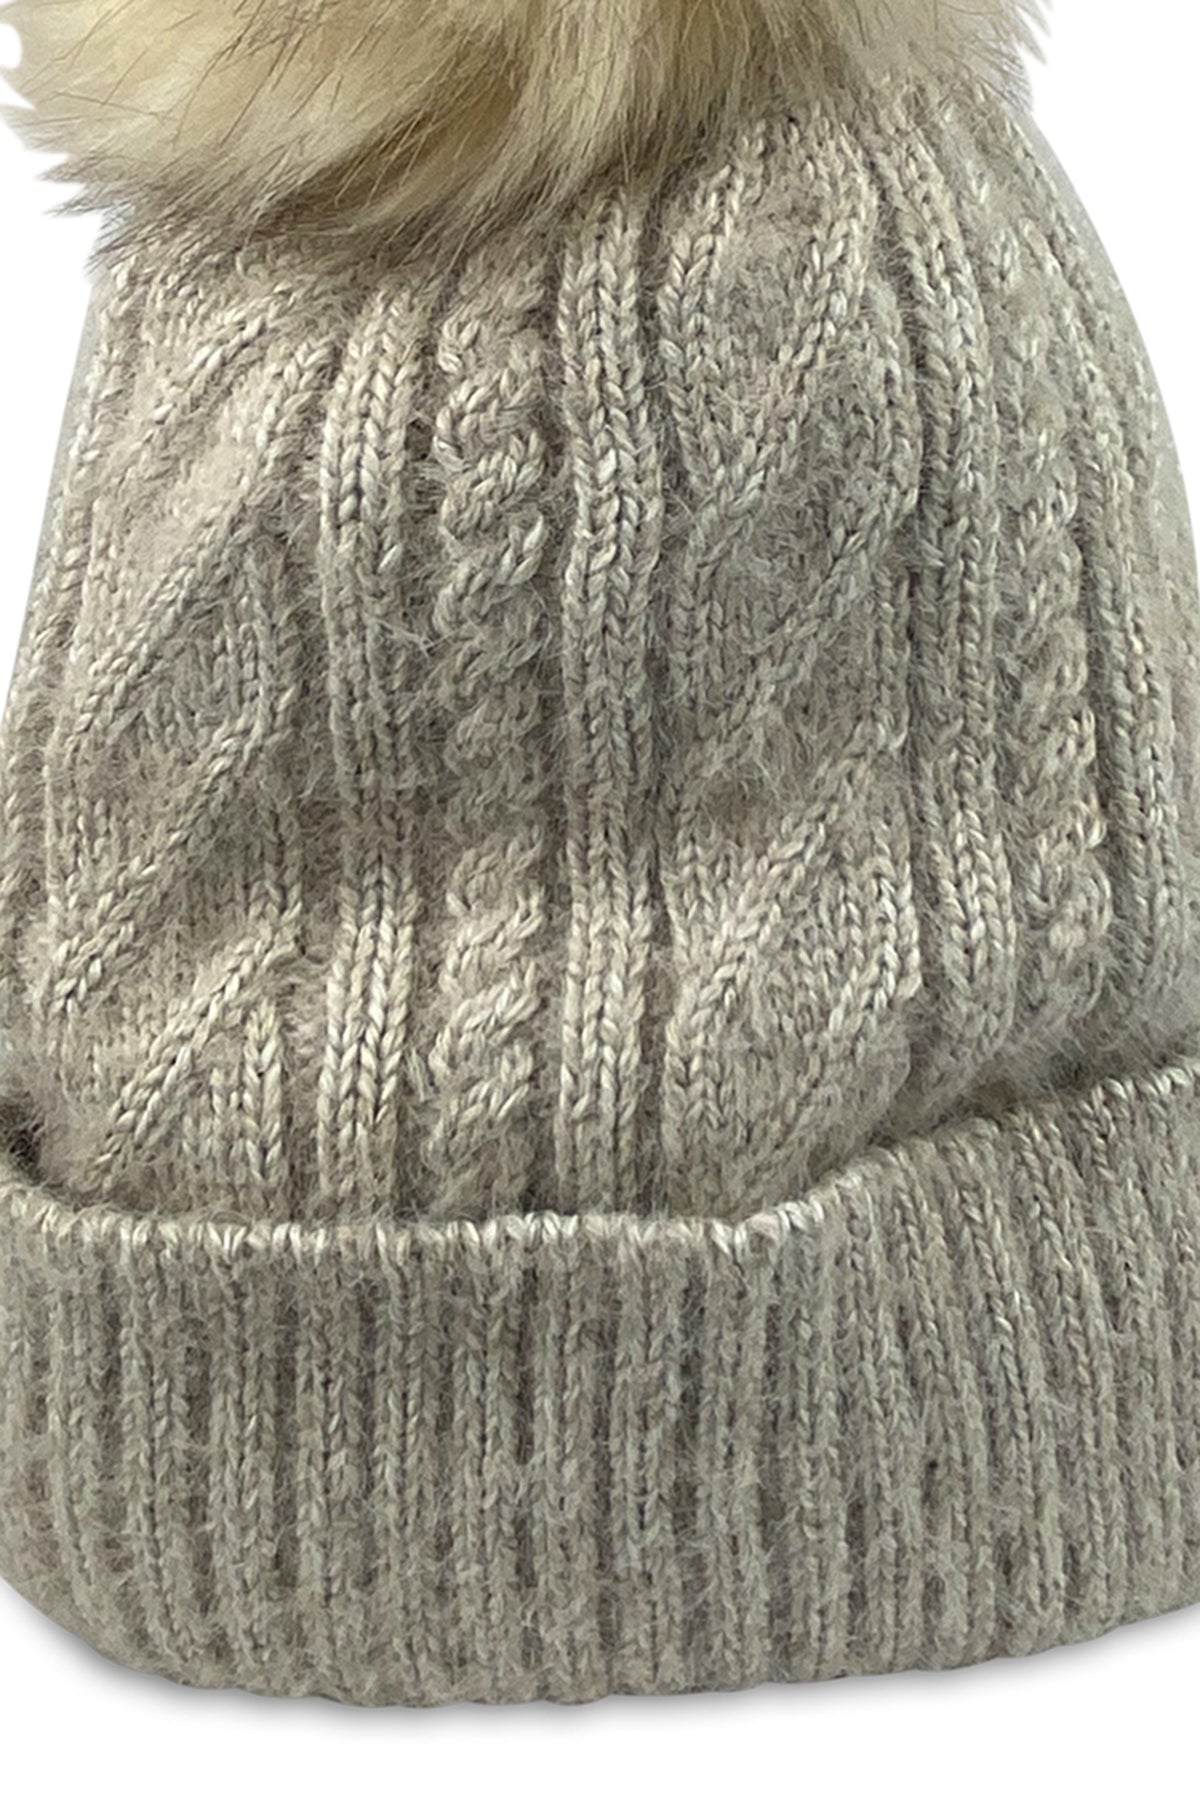 Classic Cable Lined Pom Beanie Hat Attack Oatmeal Detail-23462047154369